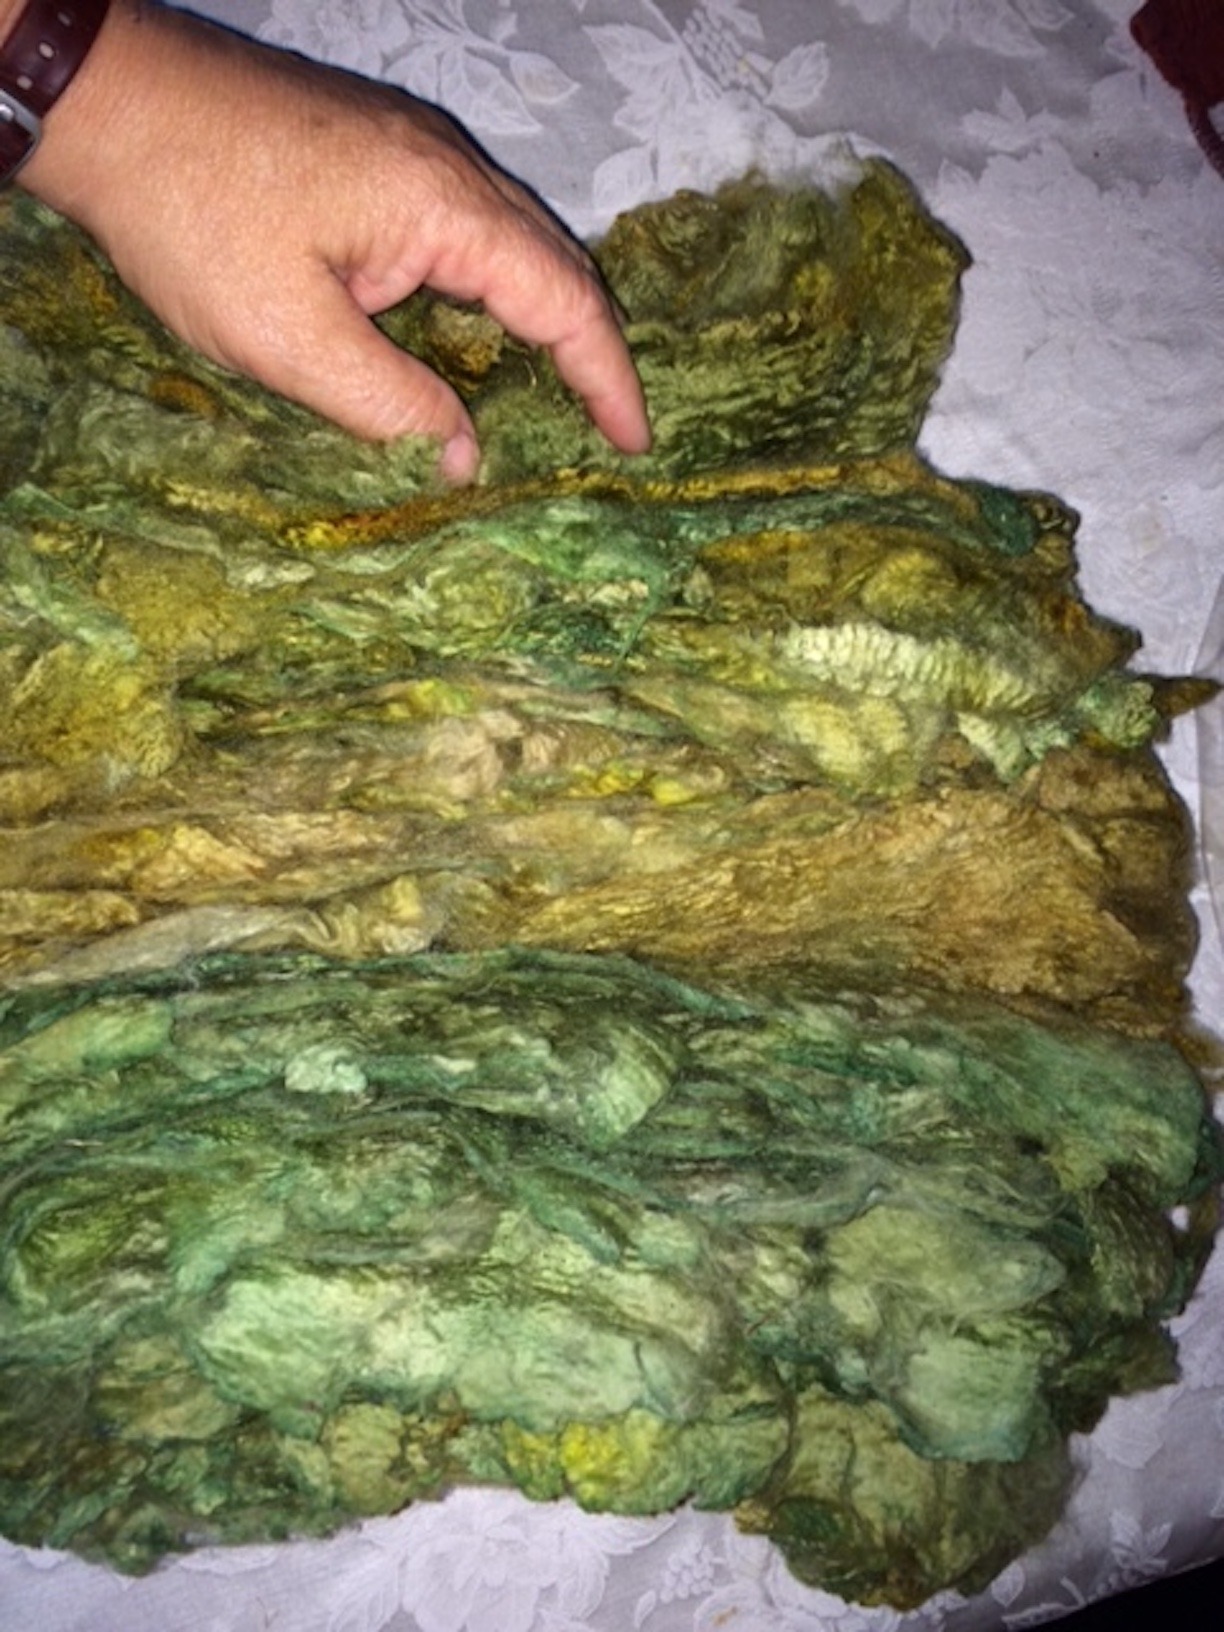 merino wool washed, dyed, and dried in the lock